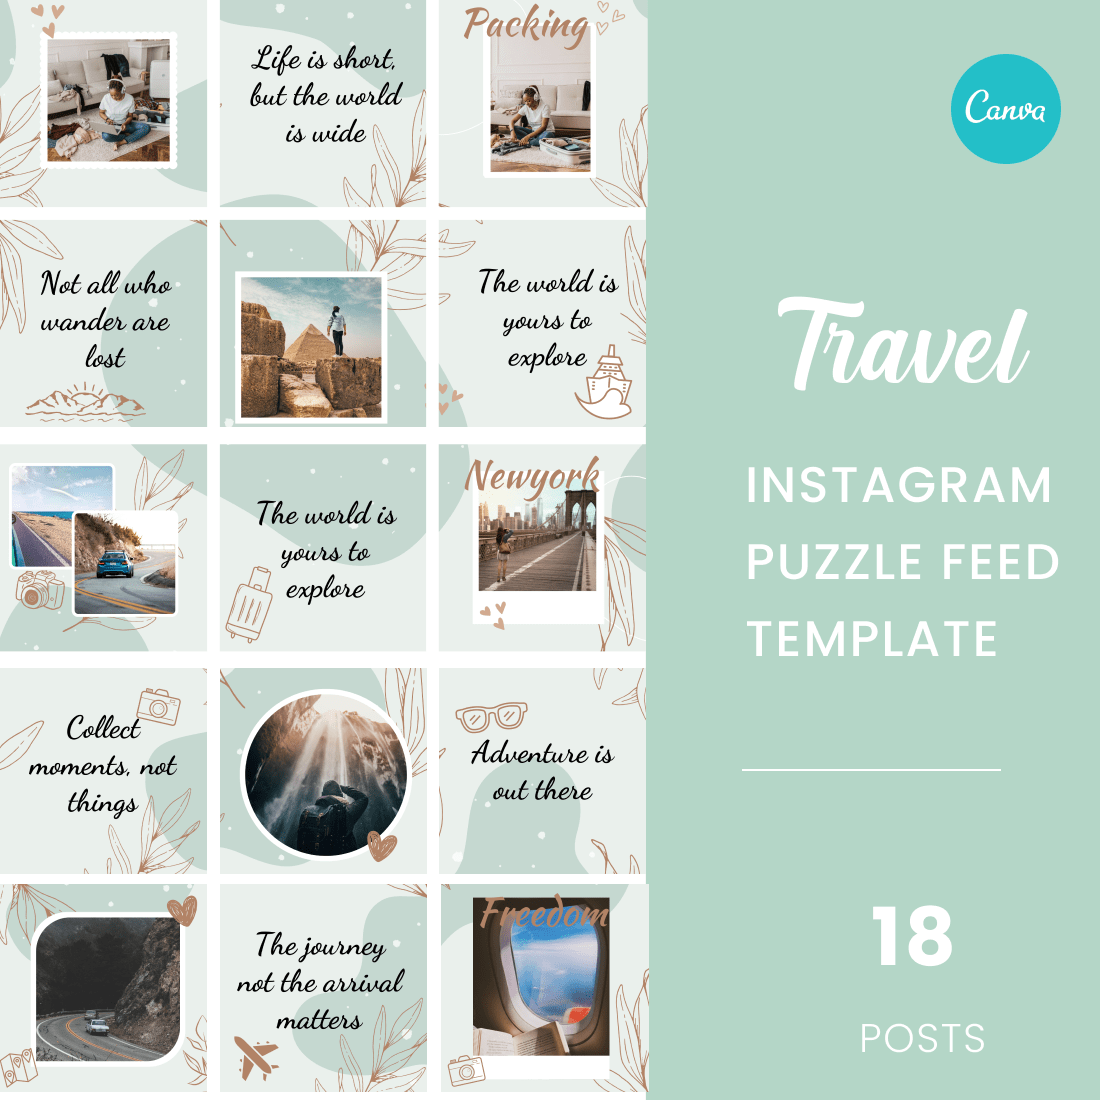 Travel Instagram Puzzle Feed Canva Template - 18 Instagram Posts cover image.